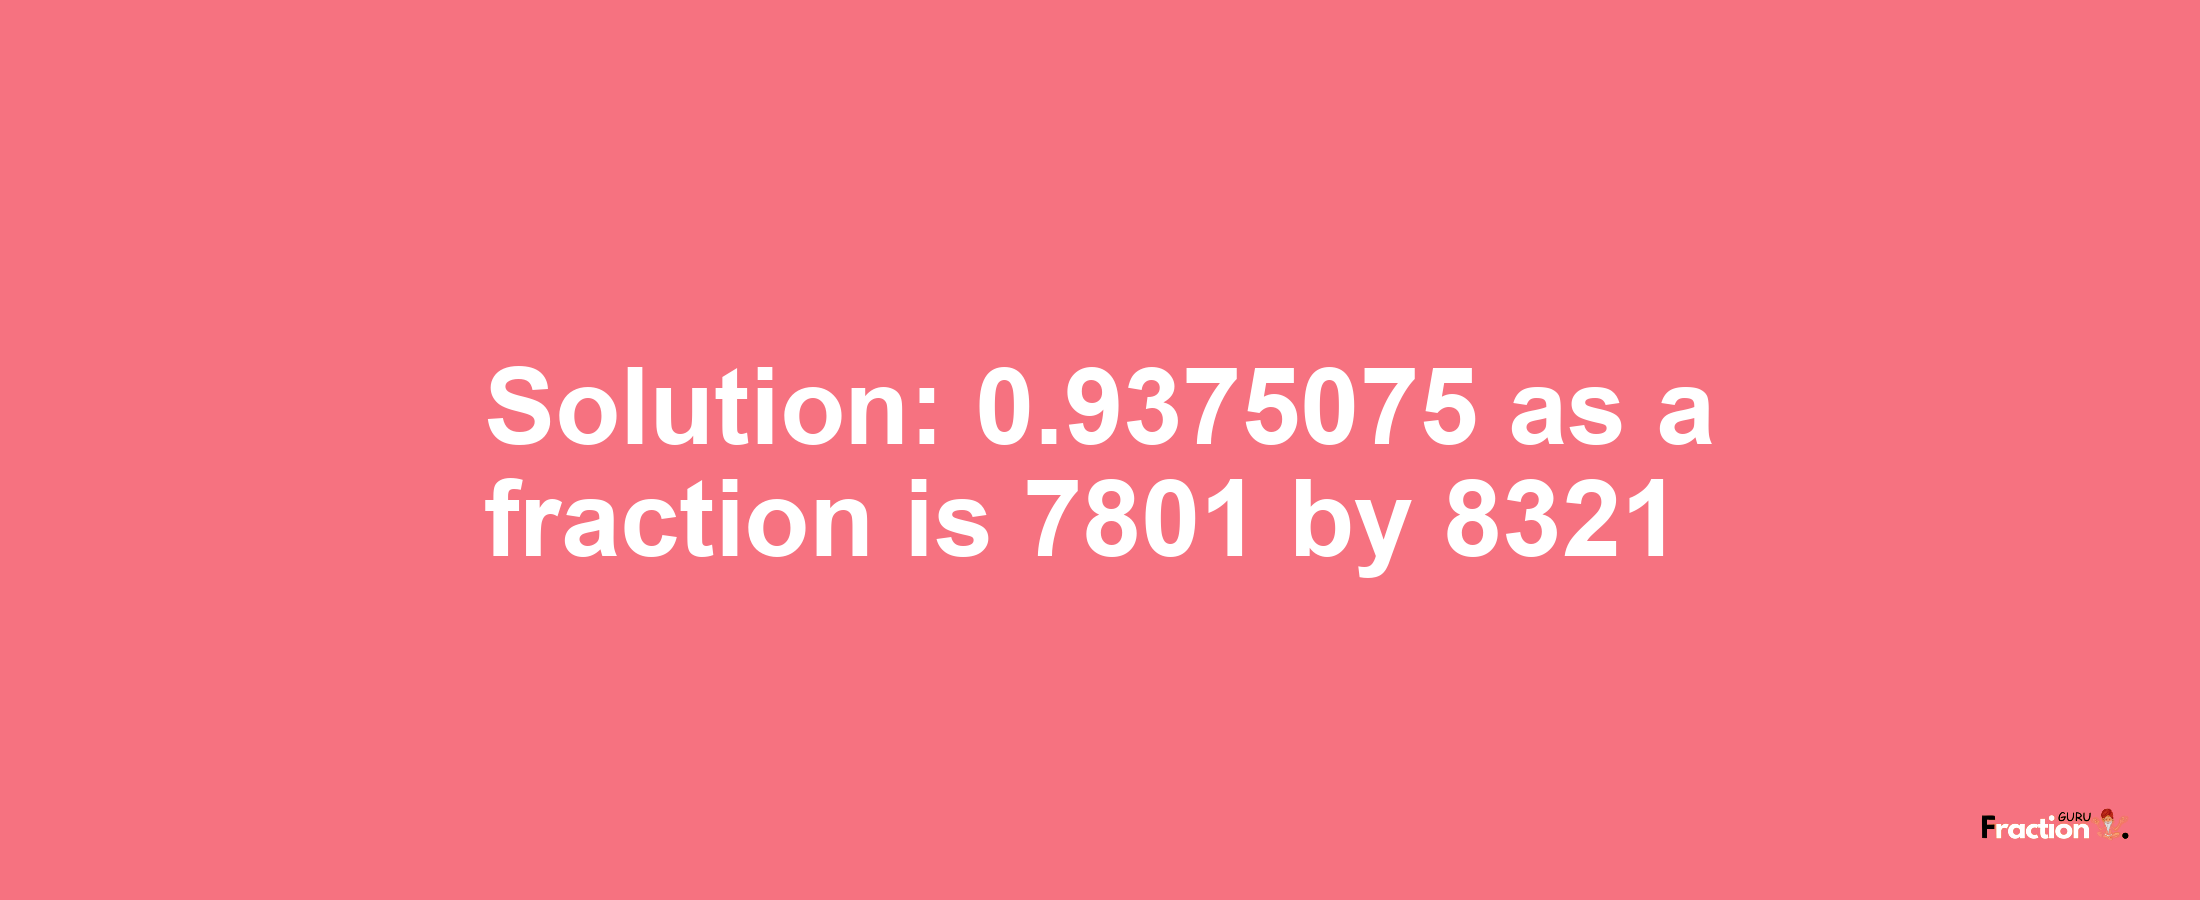 Solution:0.9375075 as a fraction is 7801/8321